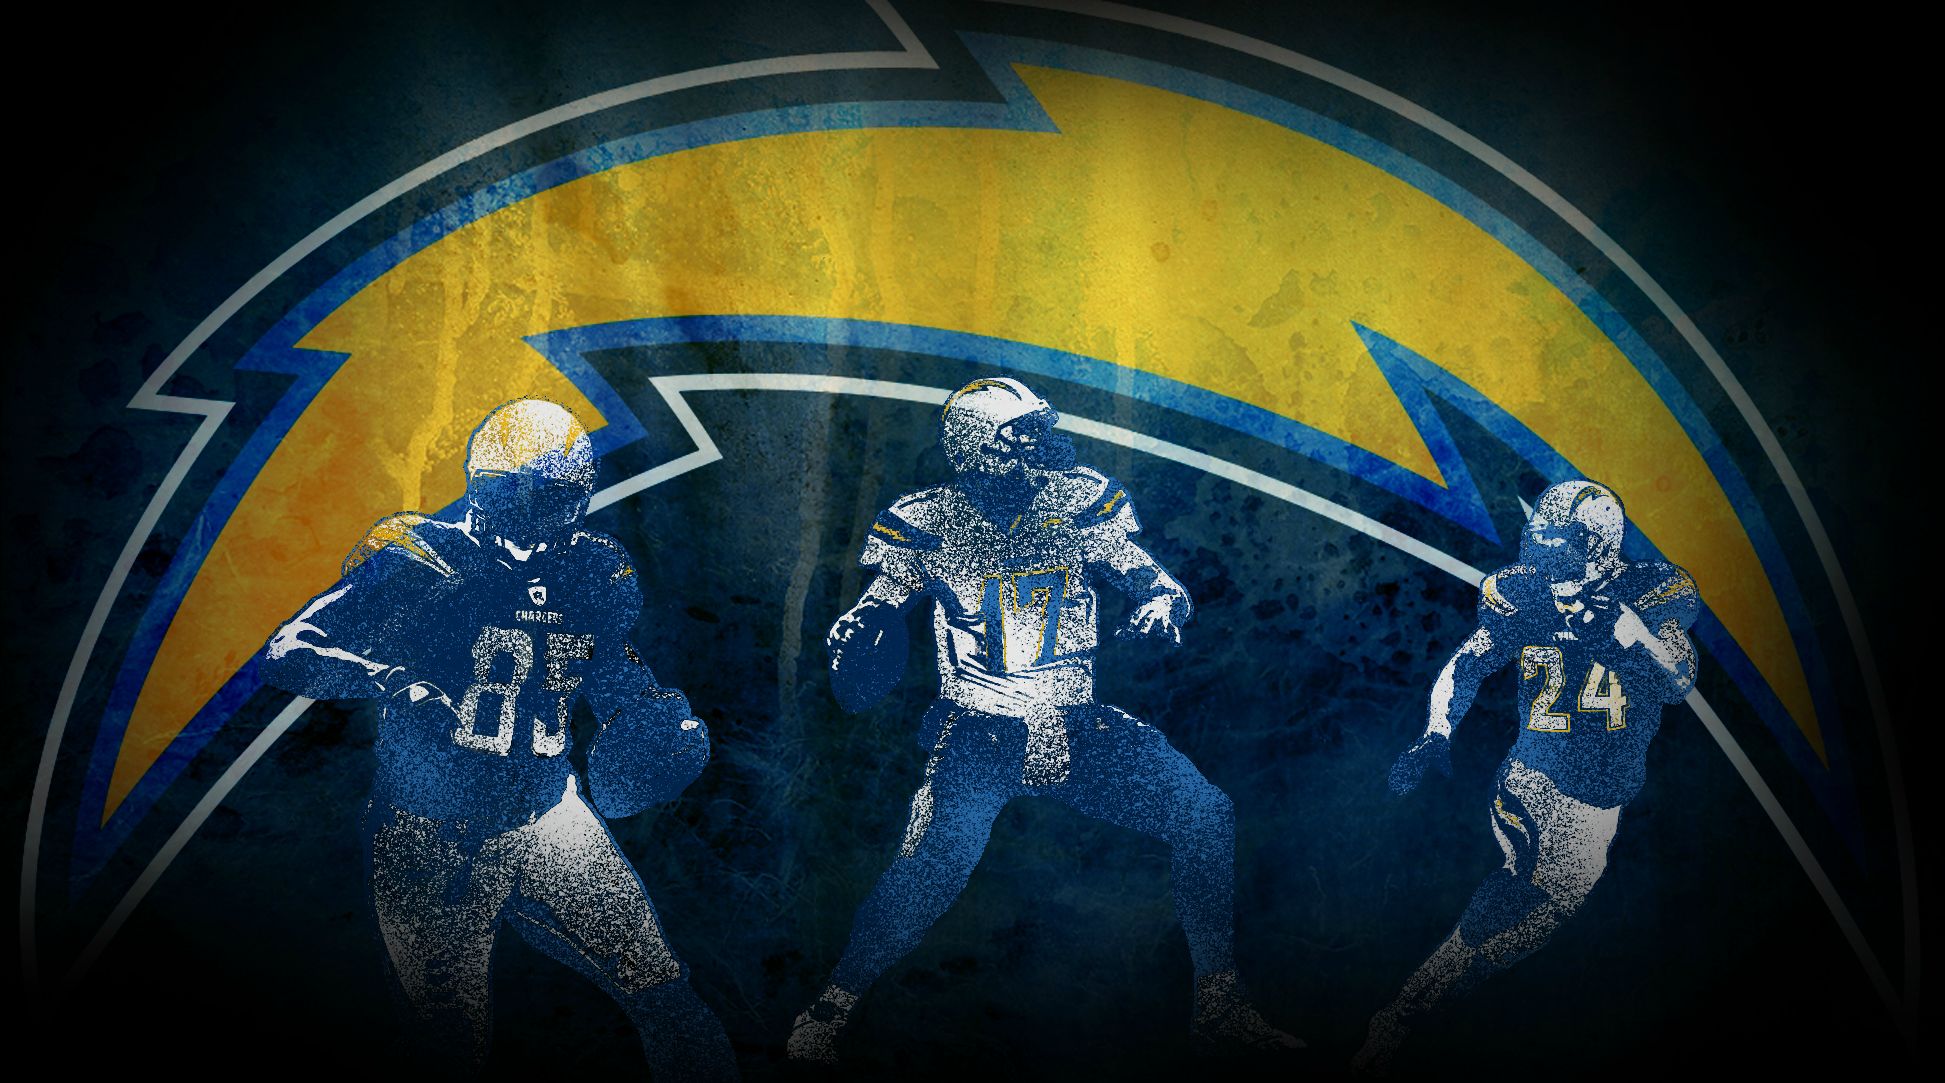 Diego Chargers San